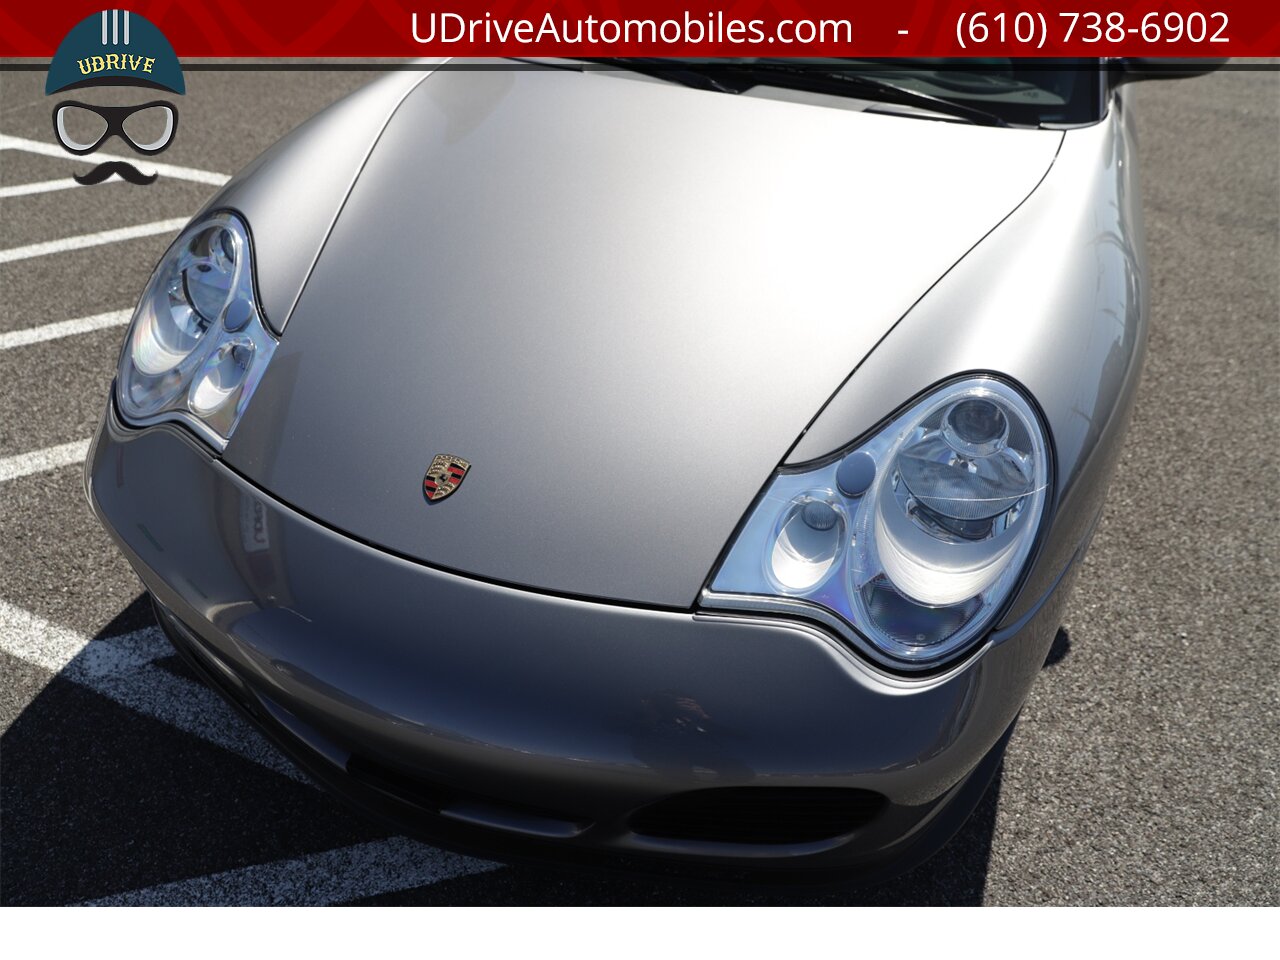 2003 Porsche 911 996 Turbo X50 Power Kit 6 Speed Seal Grey  over Black Leather - Photo 11 - West Chester, PA 19382